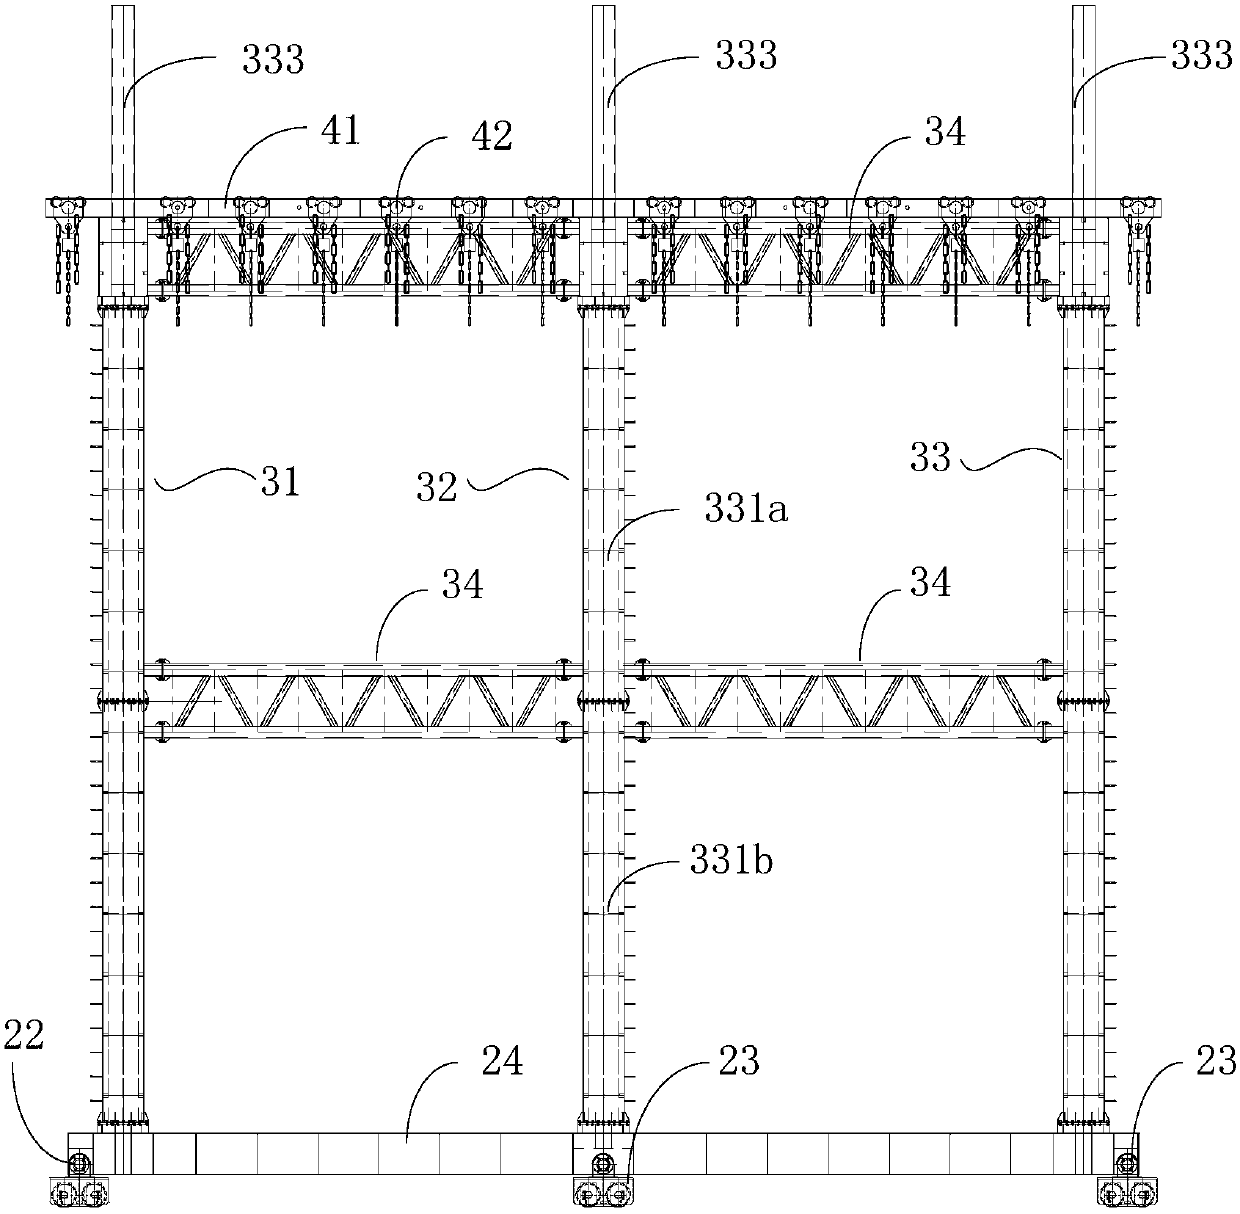 Adjusting type light movable formwork support and steel formwork capable of guaranteeing tightness of joint of new concrete and old concrete of lock chamber